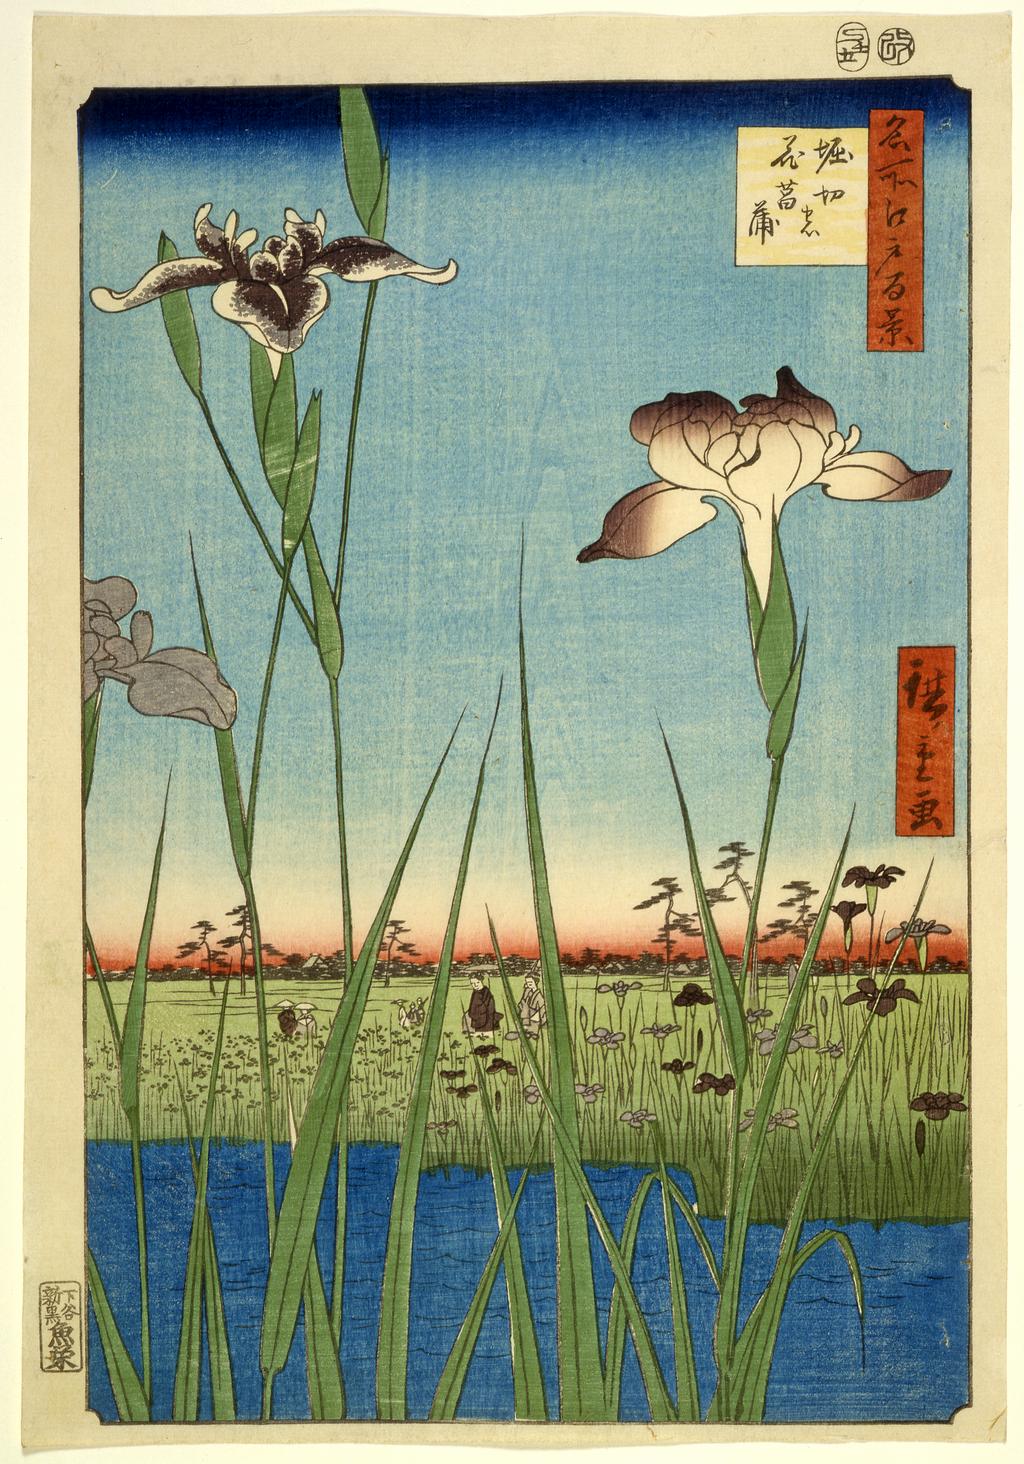 An image of Horikiri no hanashôbu. Hiroshige, Utagawa (Japanese, 1797-1858). Colour print from woodblocks. Ôban. Signed: Hiroshige ga. Publisher: Uoei (Uoya Eikichi). Date seal: Snake 5 (5/1857). Censor’s seal: aratame. 1857. Ukiyo-e. Notes: No. 64 from the series Meisho Edo hyakkei (One hundred famous views of Edo), in the section for Summer. The village of Horikiri was situated about a mile east of the mouth of the Ayase River seen in the adjacent print. It was one of many farming communities around Edo that produced flowers for the city market. A year-round variety of flowers was grown in this swampy area, but it was best known for the hanashôbu, a type of iris that had been cultivated here since the 1660s and had been developed into several exotic hybrids. The plant was introduced into the West in 1852 and in the following decades the Horikiri plantations developed a booming export trade for bulbs; this faded in the 1920s after the plant had become well established in Europe and the United States. Sightseers from Edo are seen admiring the blossoms. An alternative printing has more subtle shading and a more elaborately coloured cartouche. T.3450.